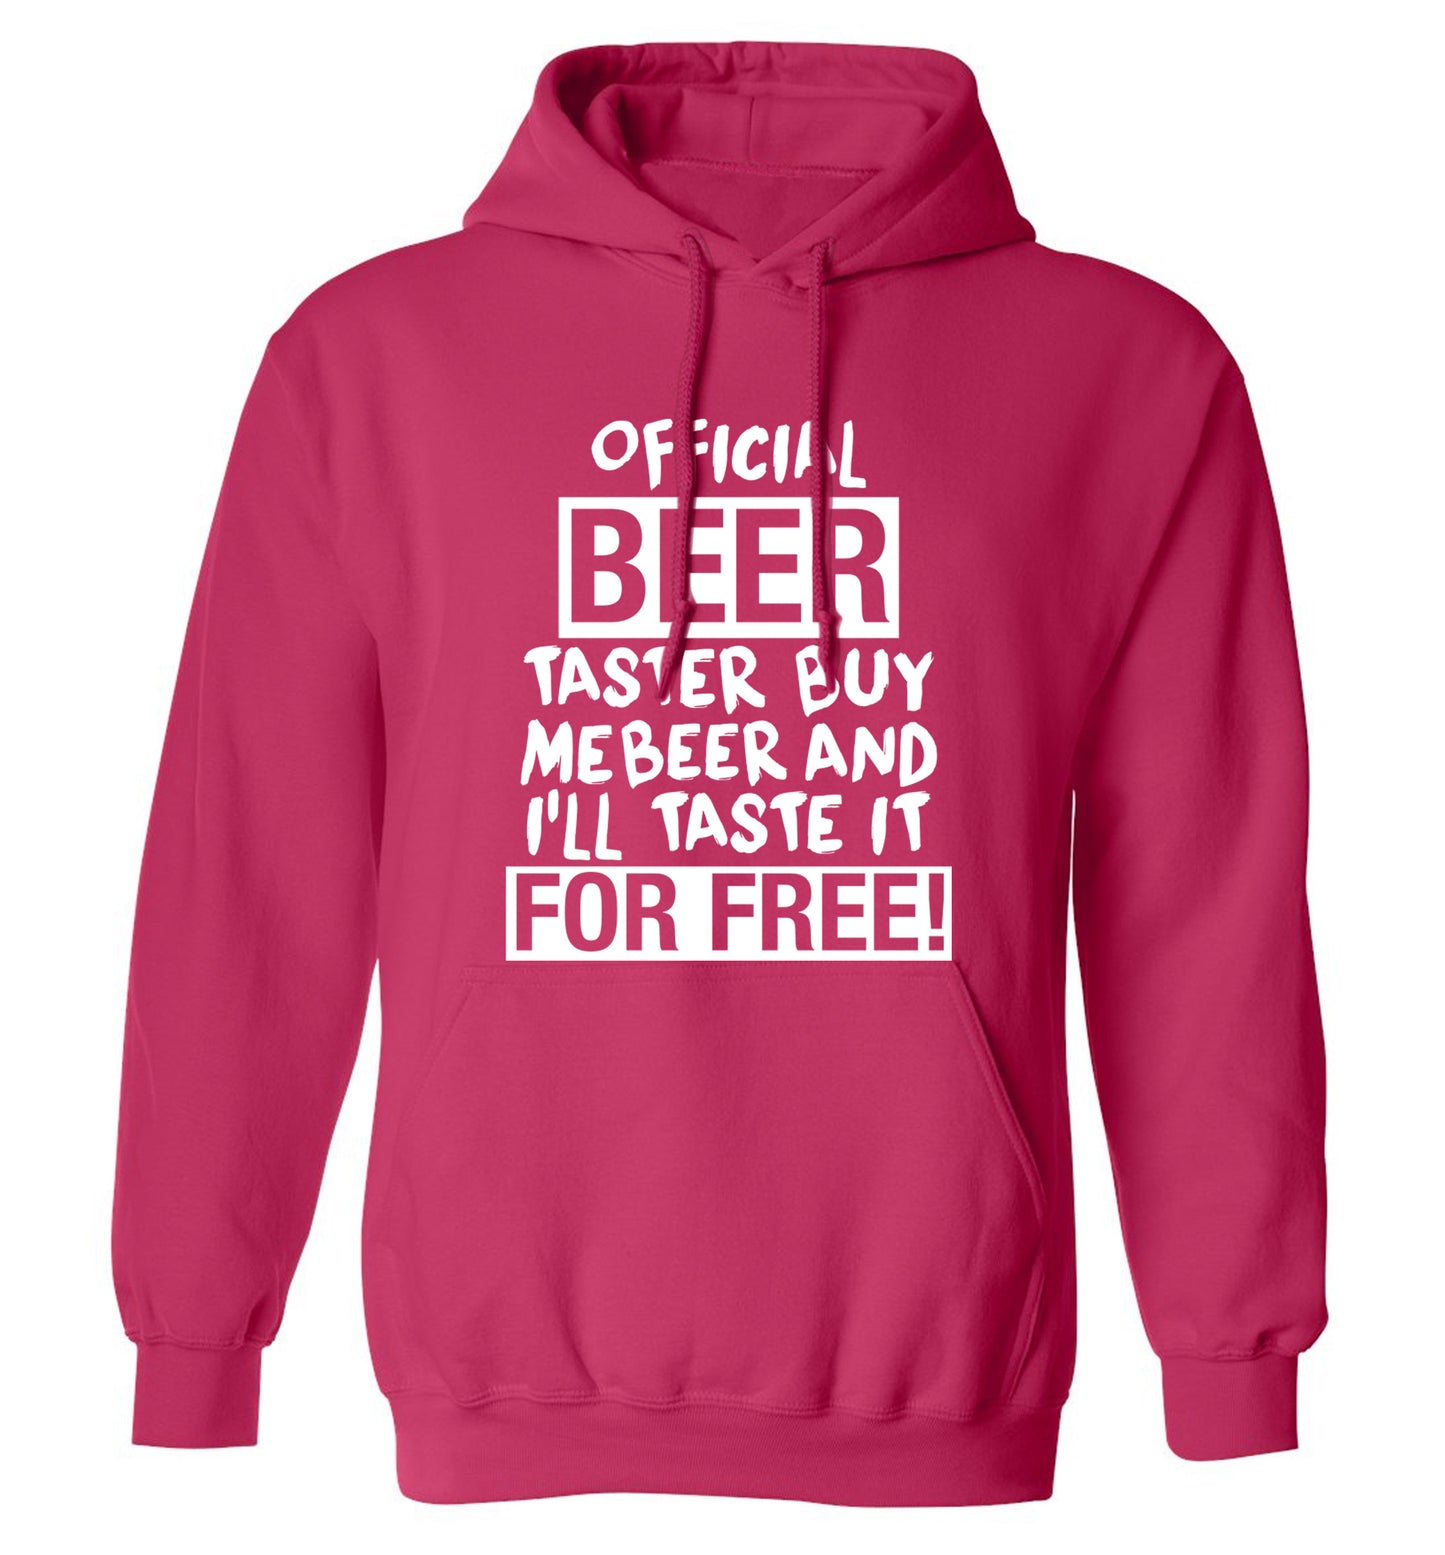 Official beer taster buy me beer and I'll taste it for free! adults unisex pink hoodie 2XL